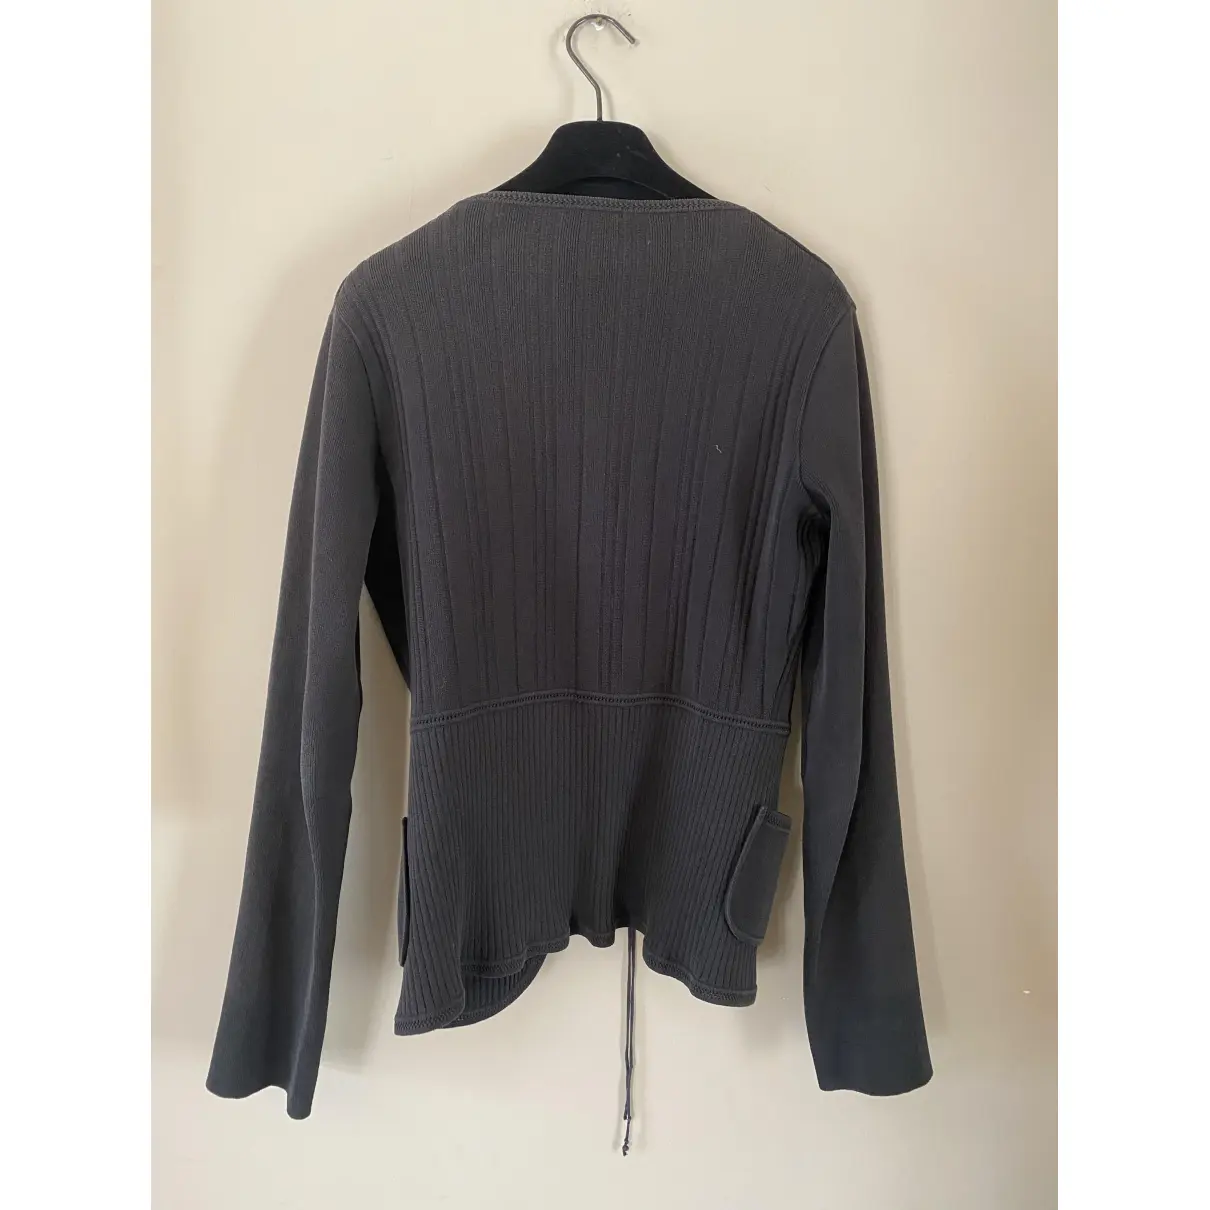 Buy Chanel Anthracite Viscose Knitwear online